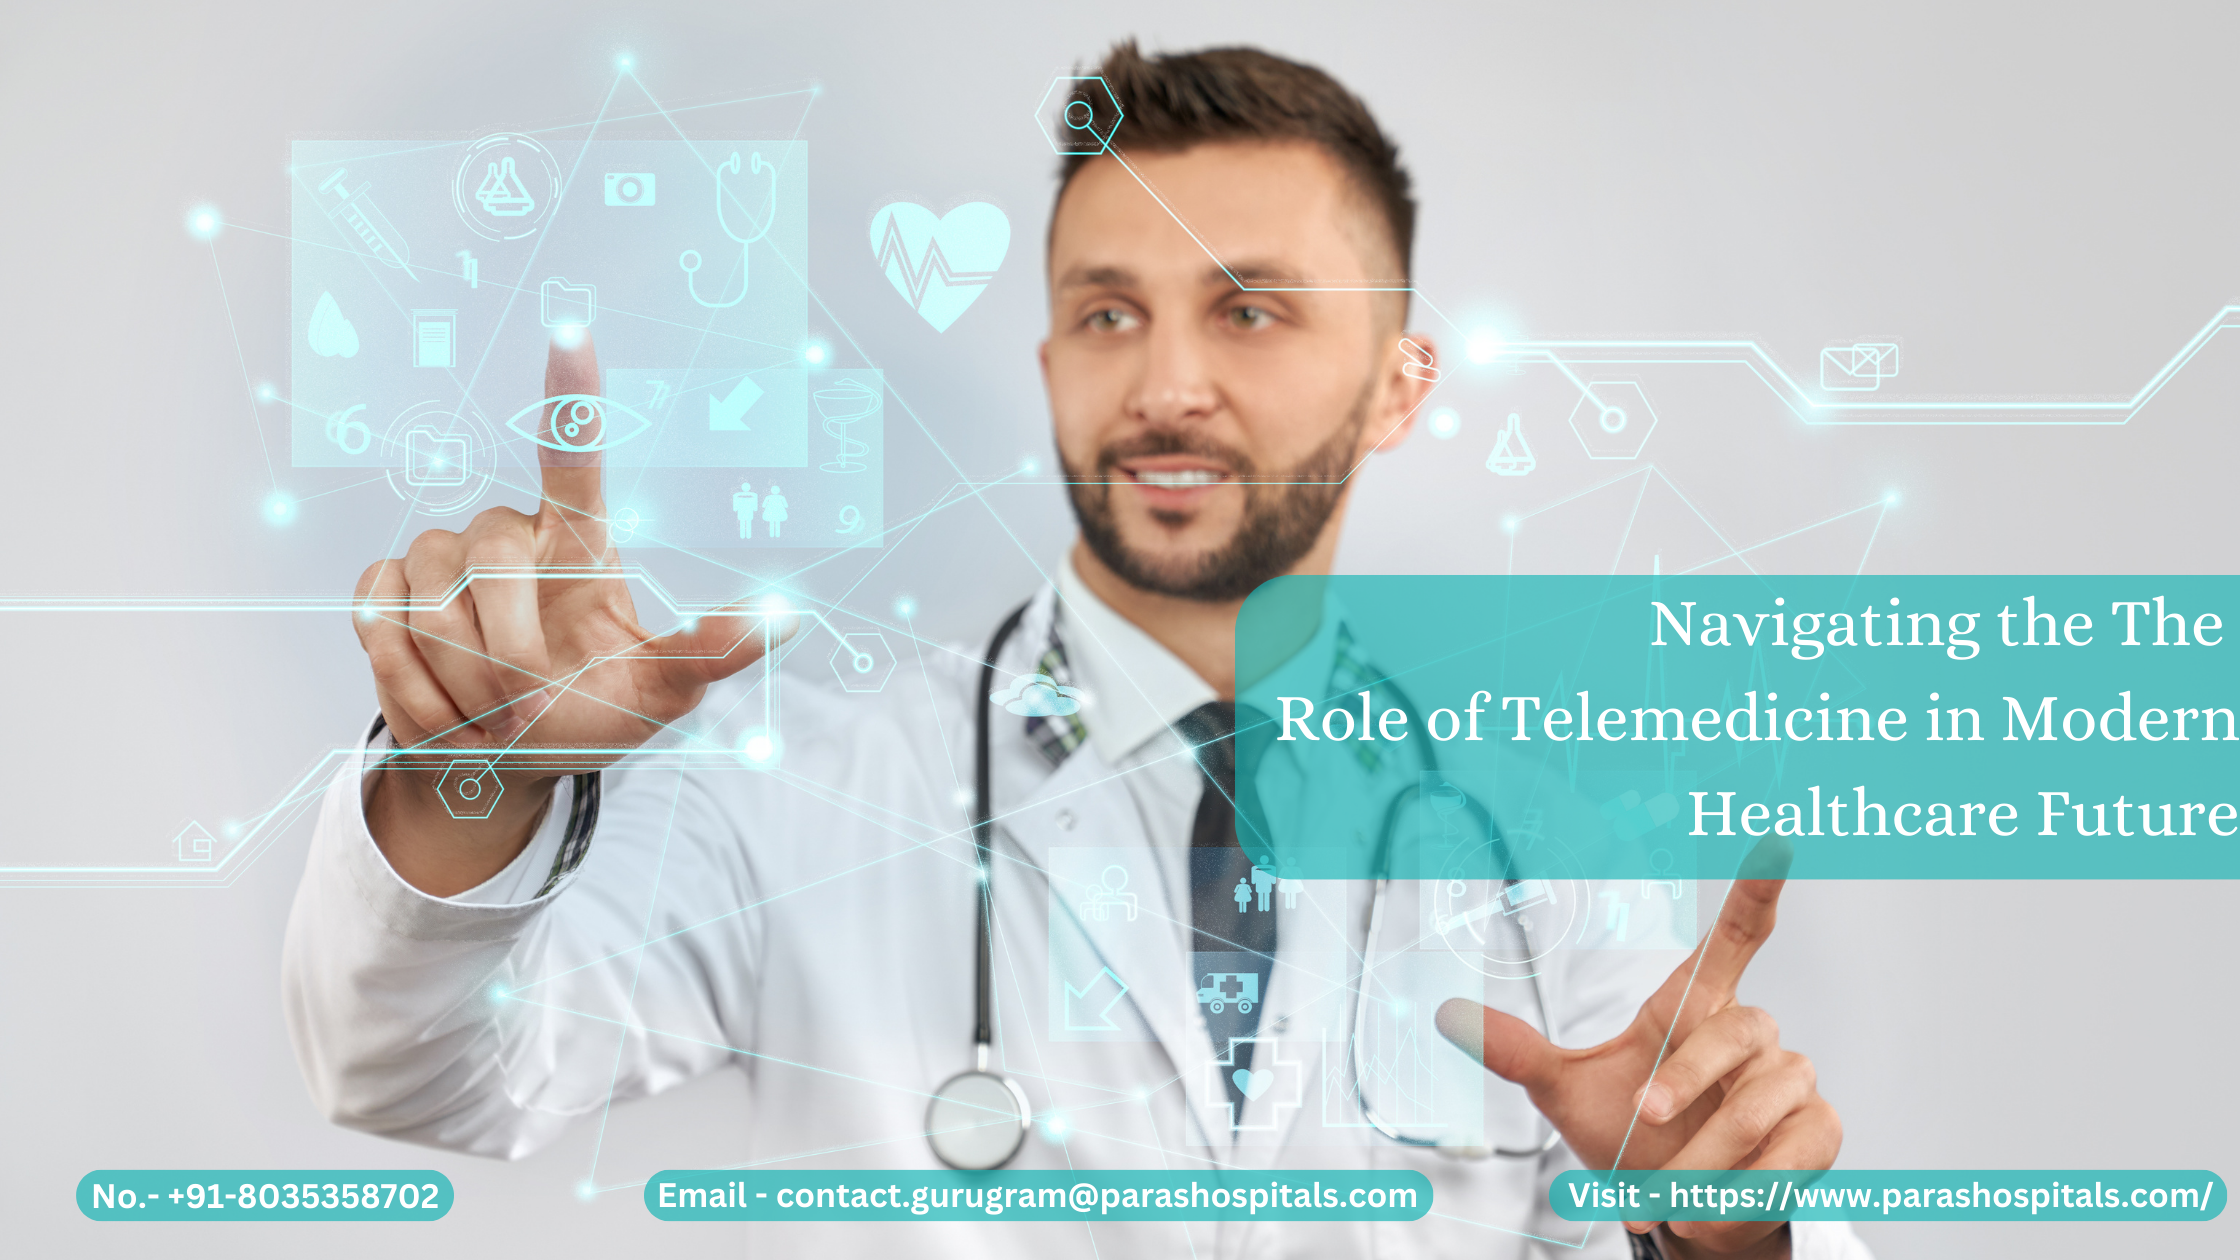 Navigating the The Role of Telemedicine in Modern Healthcare Future